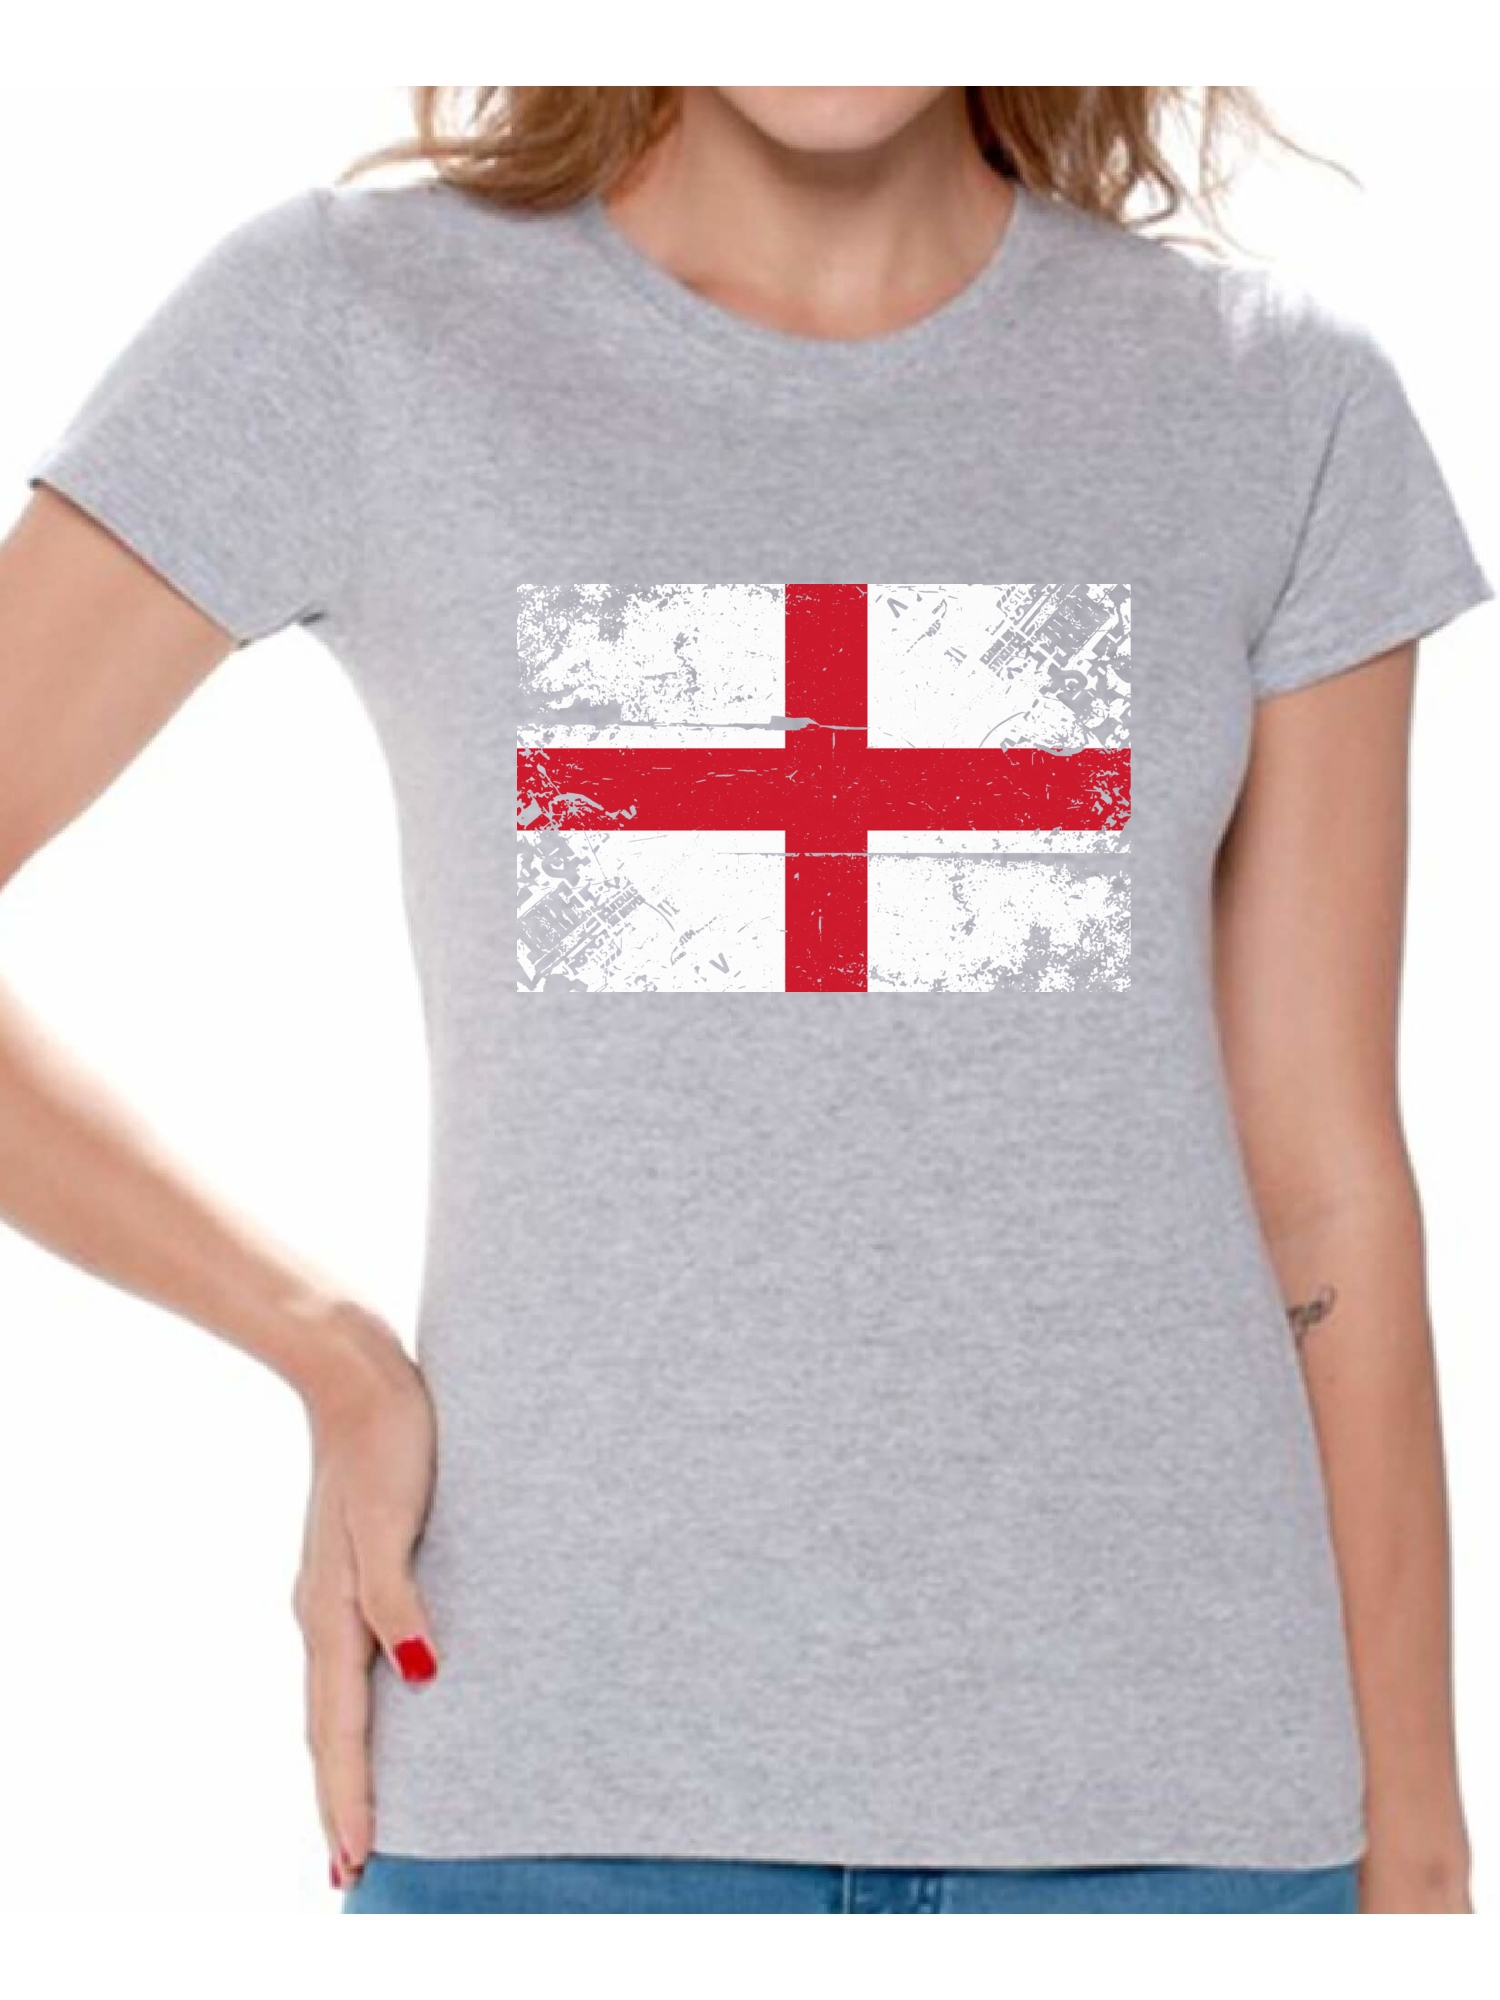 Awkward Styles England Flag Shirt for Women English Soccer 2018 Tshirt Gifts from England Flag of England English Women England Shirts for Women England 2018 Tshirt English Gifts for Her English Flag - image 1 of 4